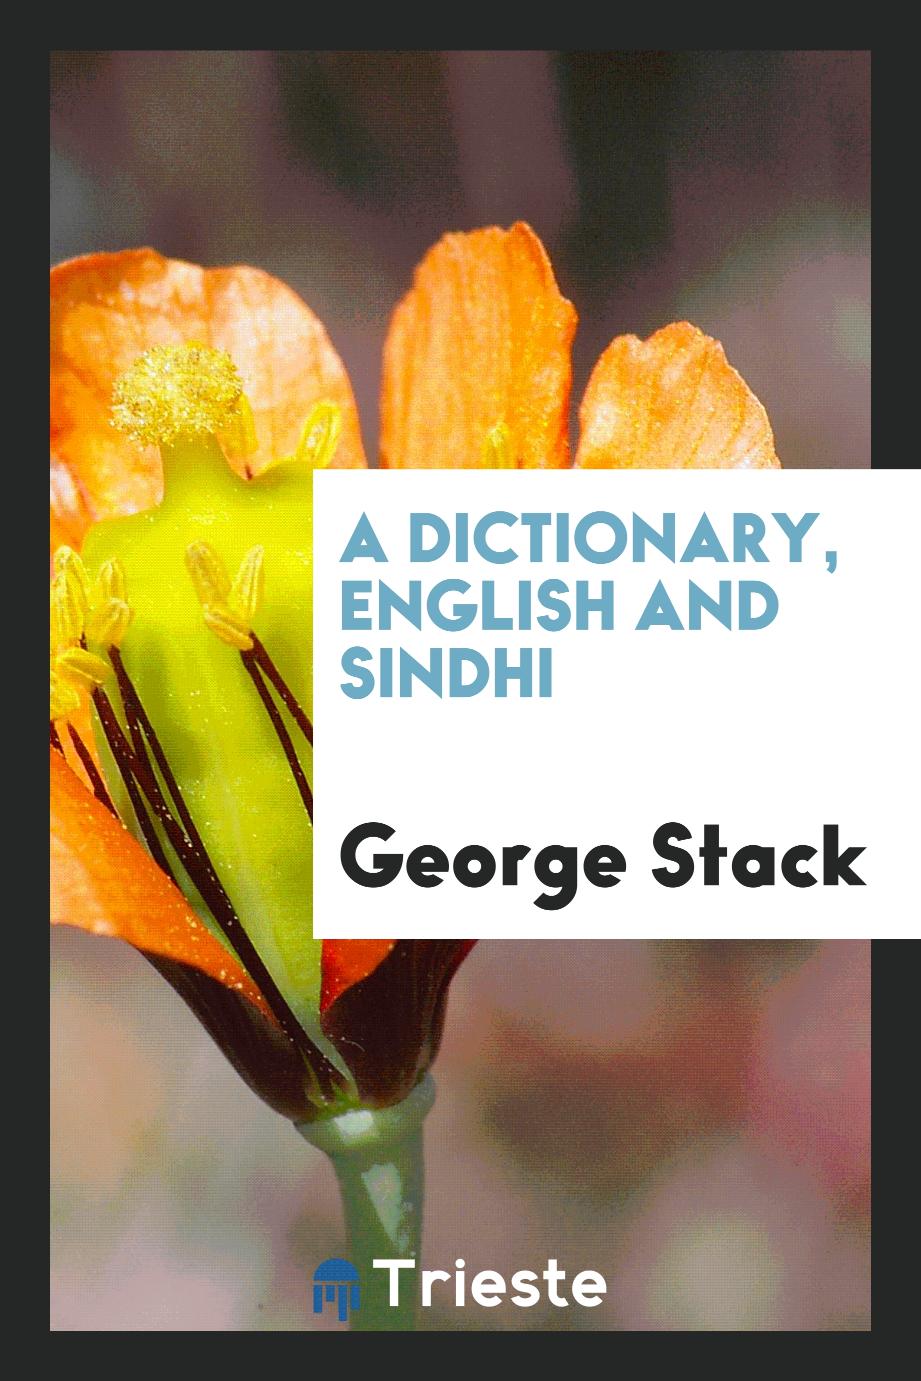 A Dictionary, English and Sindhi